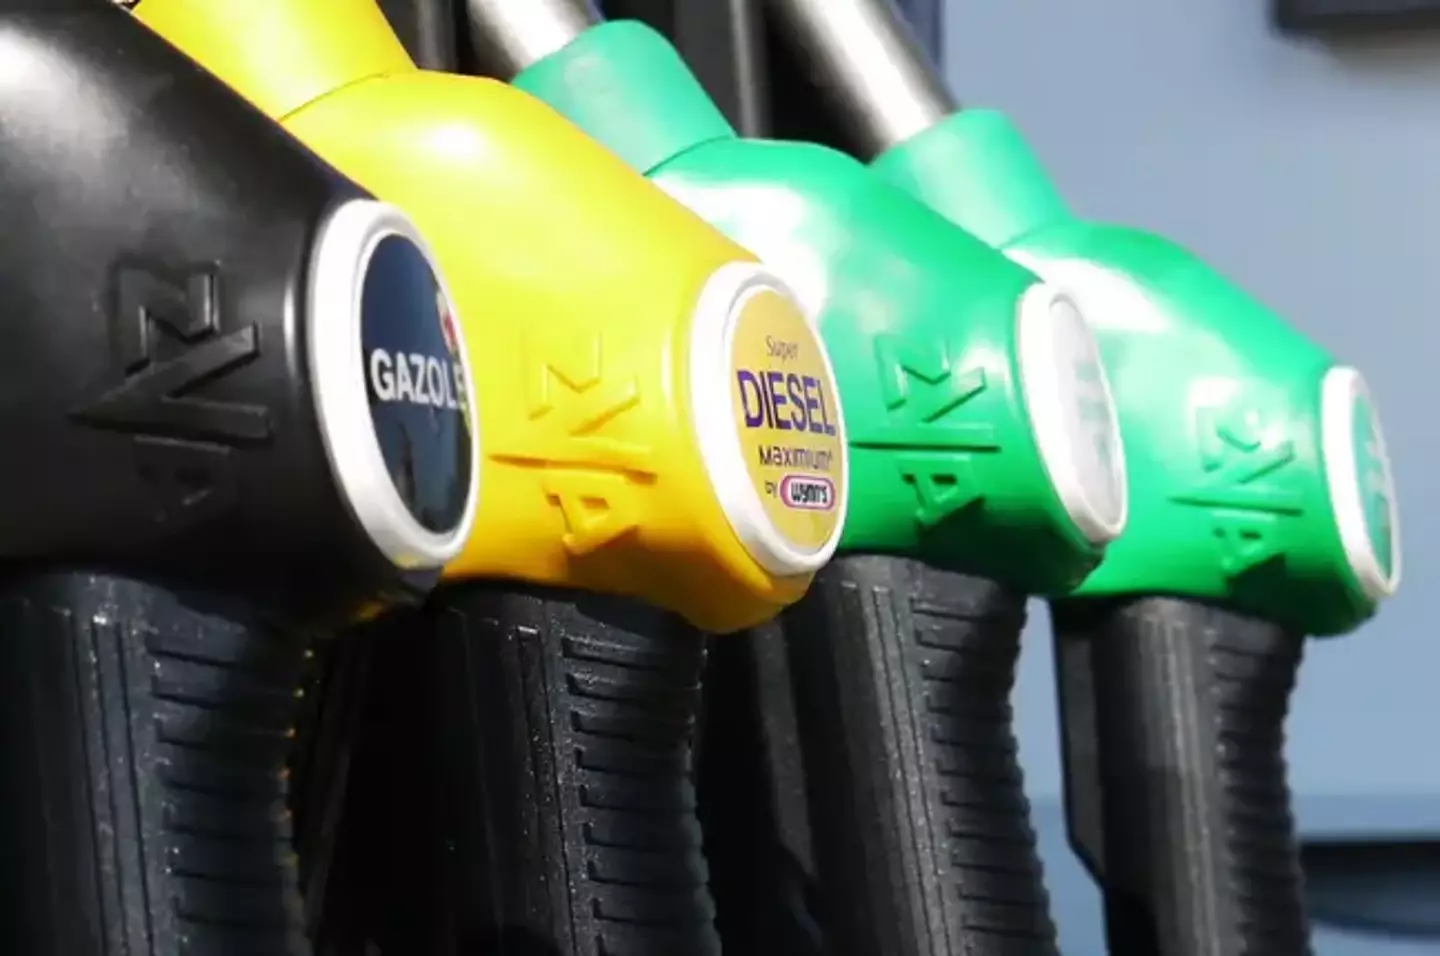 Fuel prices continue to rise in the UK.